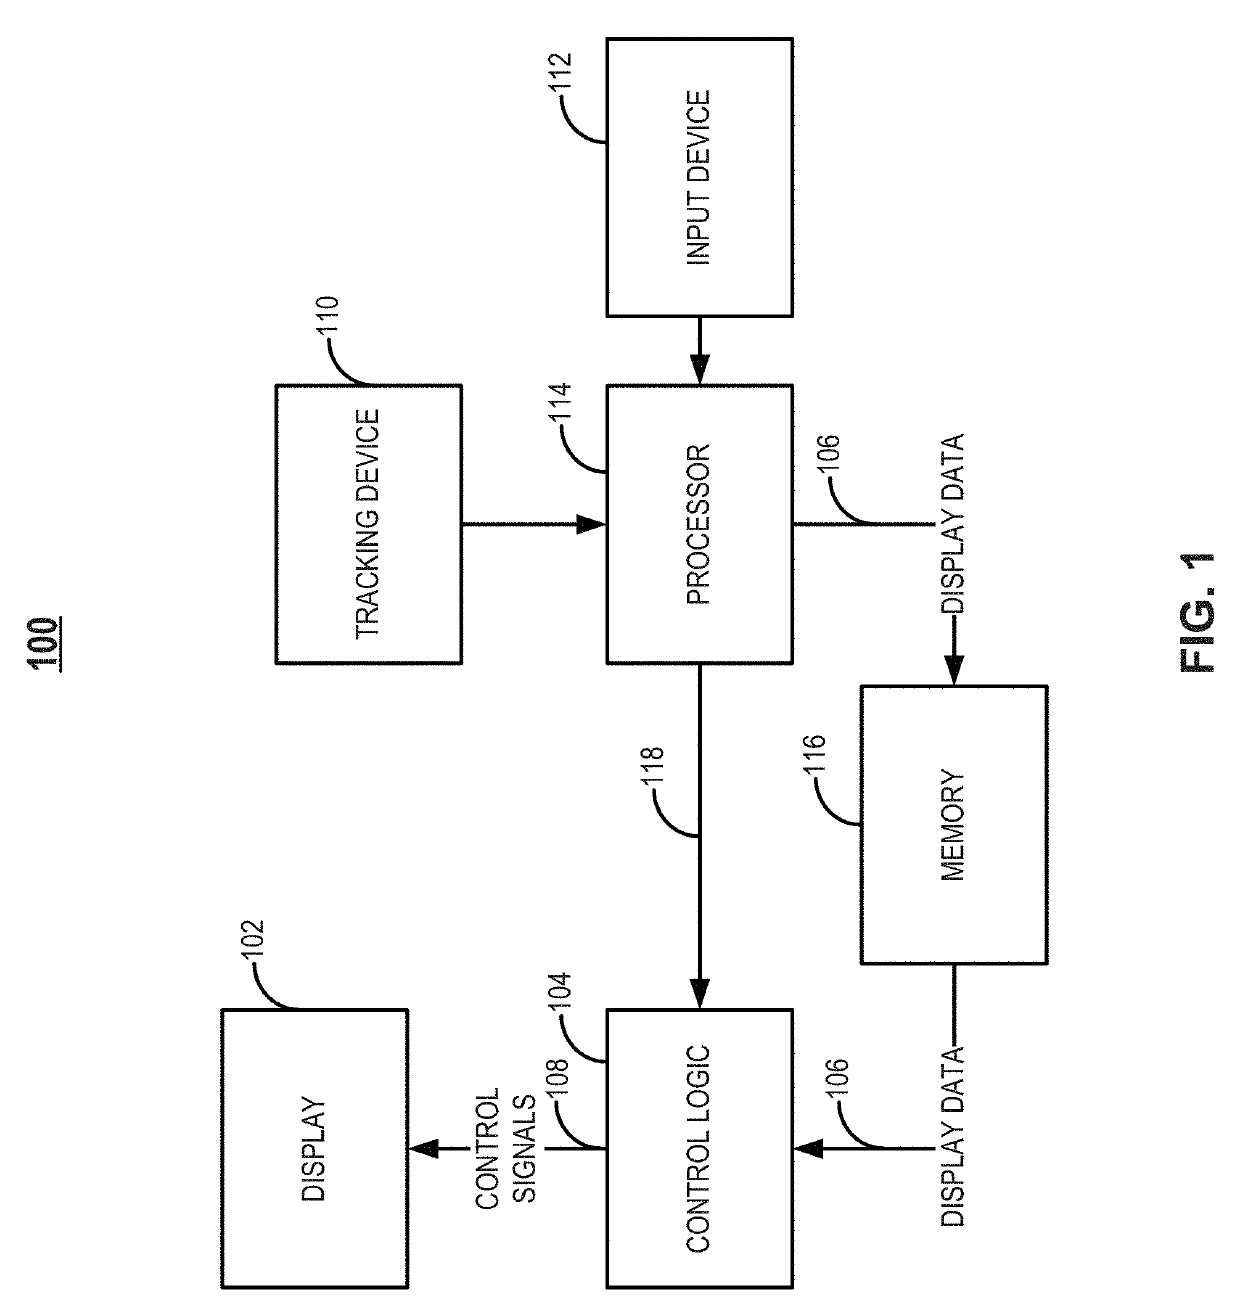 Zone-based display data processing and transmission